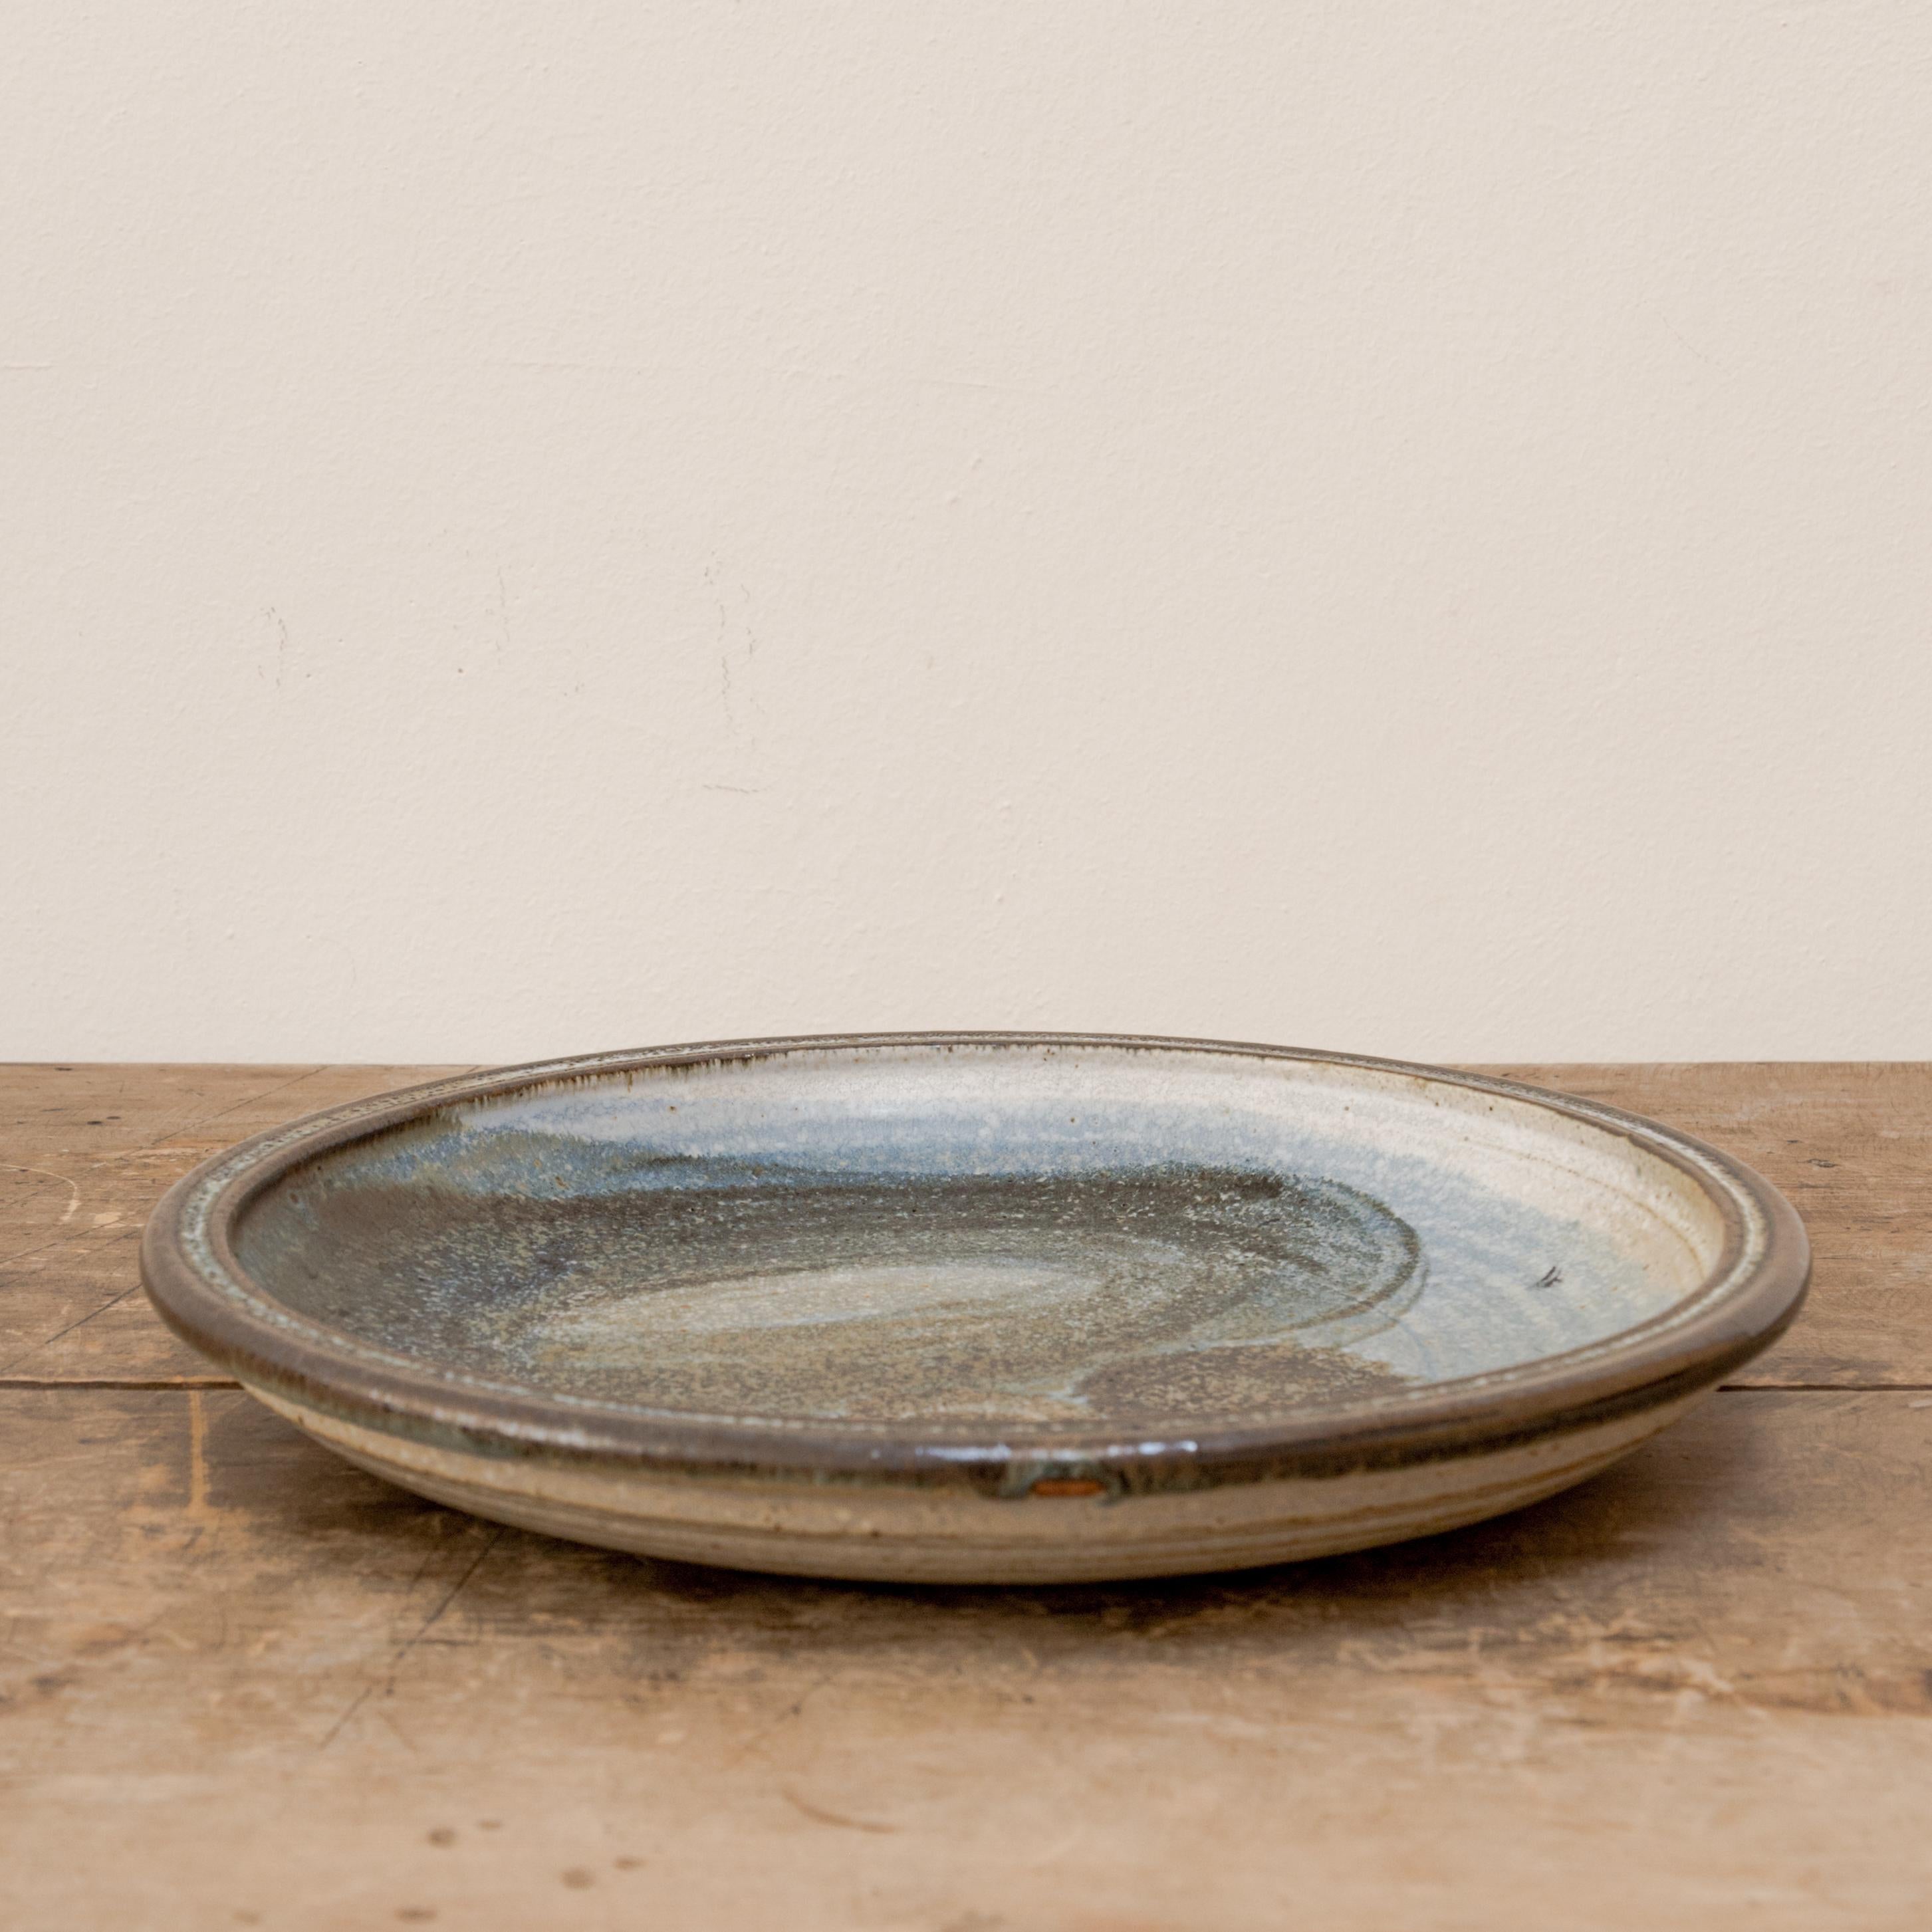 American Studioware Earthenware Platter In Excellent Condition For Sale In West Hollywood, CA